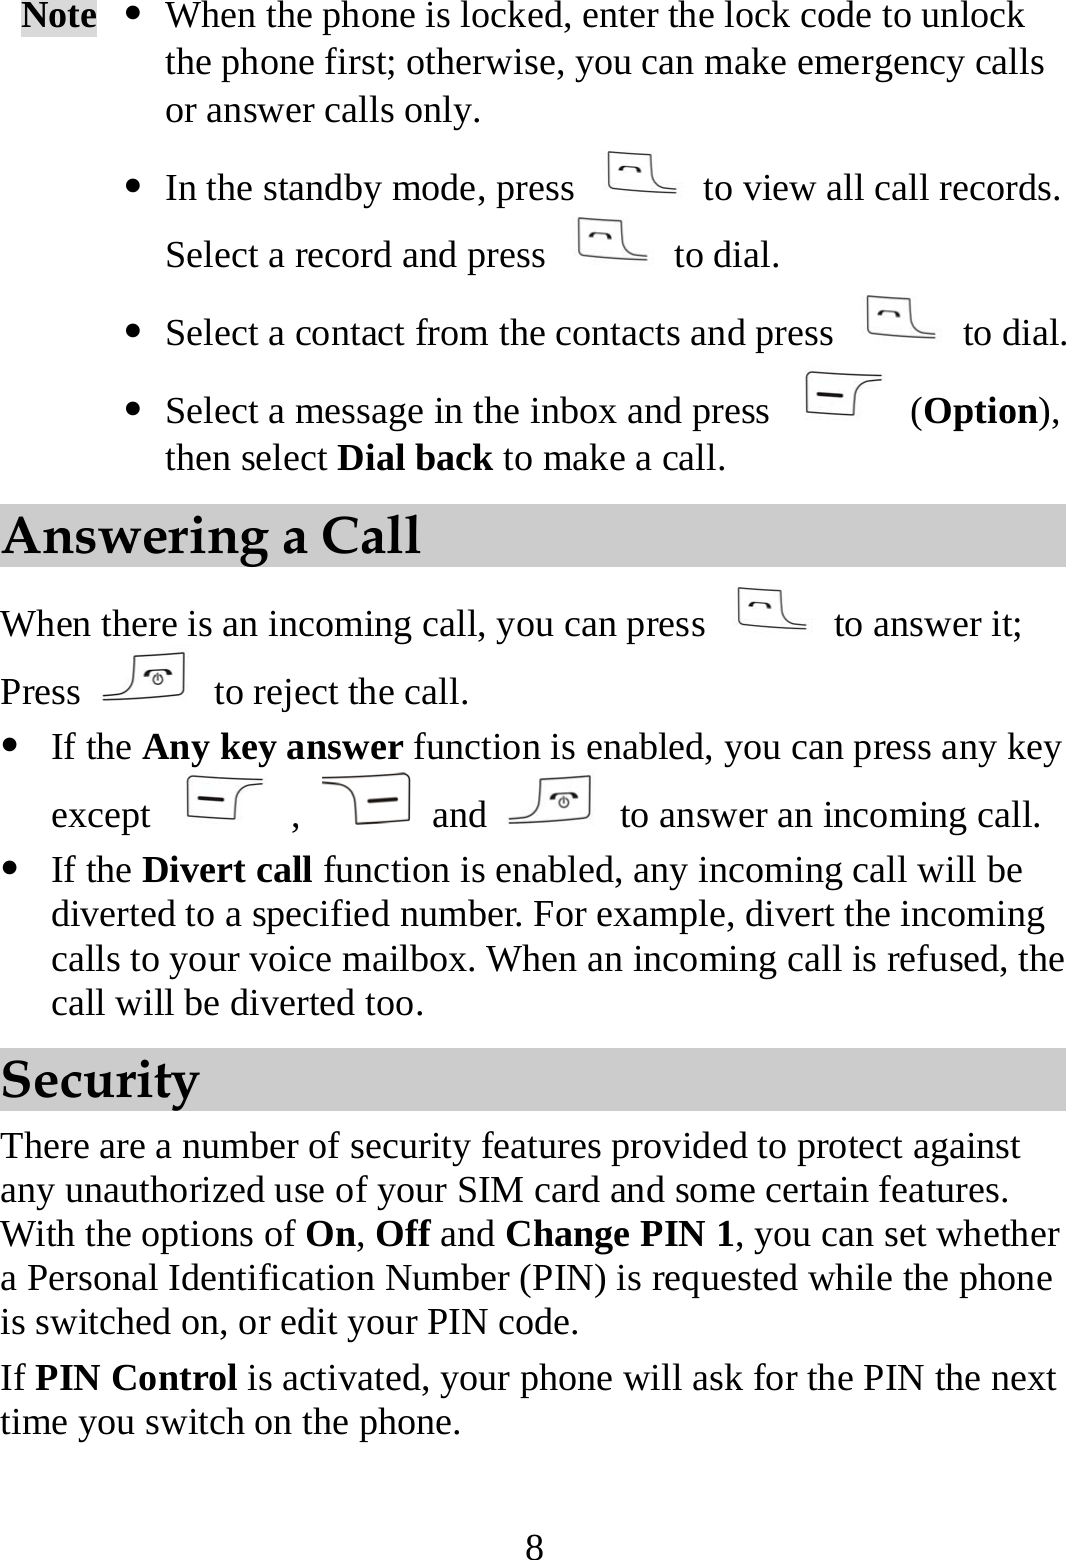 8 Note  z When the phone is locked, enter the lock code to unlock the phone first; otherwise, you can make emergency calls or answer calls only. z In the standby mode, press    to view all call records. Select a record and press   to dial. z Select a contact from the contacts and press   to dial.z Select a message in the inbox and press   (Option), then select Dial back to make a call. Answering a Call When there is an incoming call, you can press   to answer it; Press    to reject the call. z If the Any key answer function is enabled, you can press any key except   ,   and    to answer an incoming call. z If the Divert call function is enabled, any incoming call will be diverted to a specified number. For example, divert the incoming calls to your voice mailbox. When an incoming call is refused, the call will be diverted too. Security There are a number of security features provided to protect against any unauthorized use of your SIM card and some certain features. With the options of On, Off and Change PIN 1, you can set whether a Personal Identification Number (PIN) is requested while the phone is switched on, or edit your PIN code. If PIN Control is activated, your phone will ask for the PIN the next time you switch on the phone. 